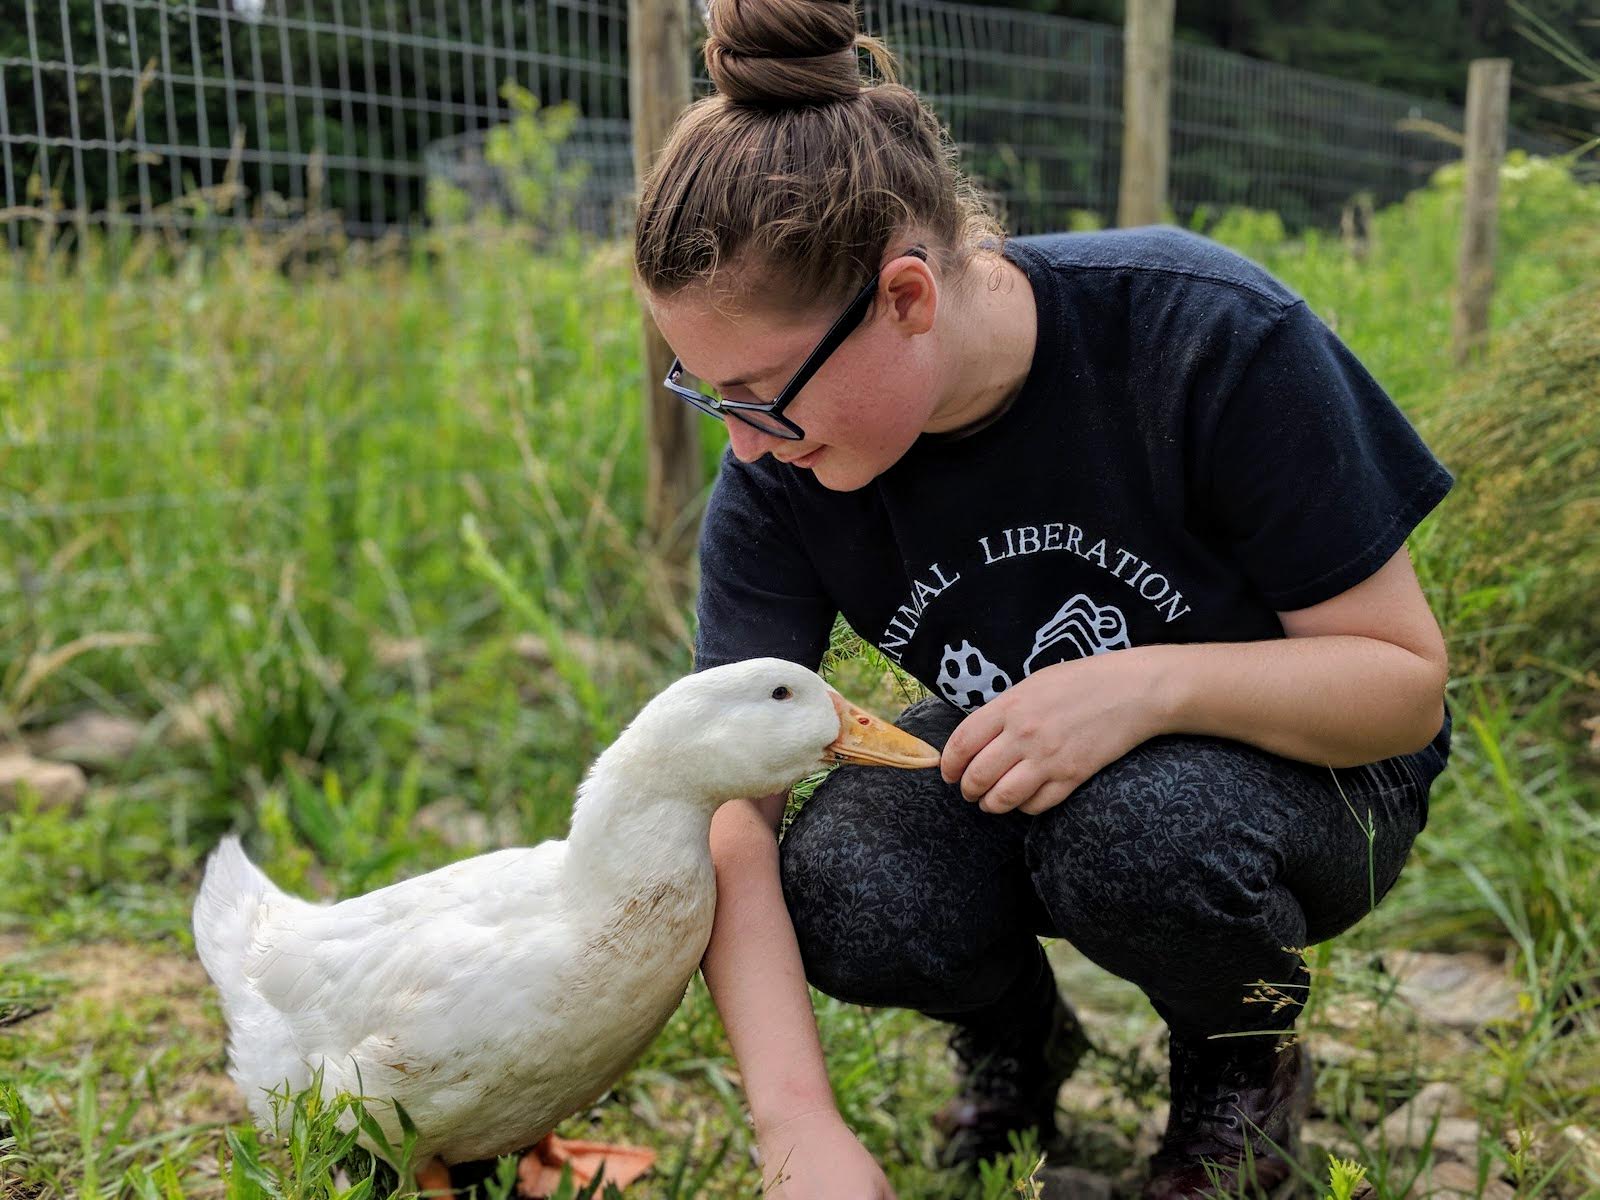 A white duck investigating the hand of a human crouched next to them